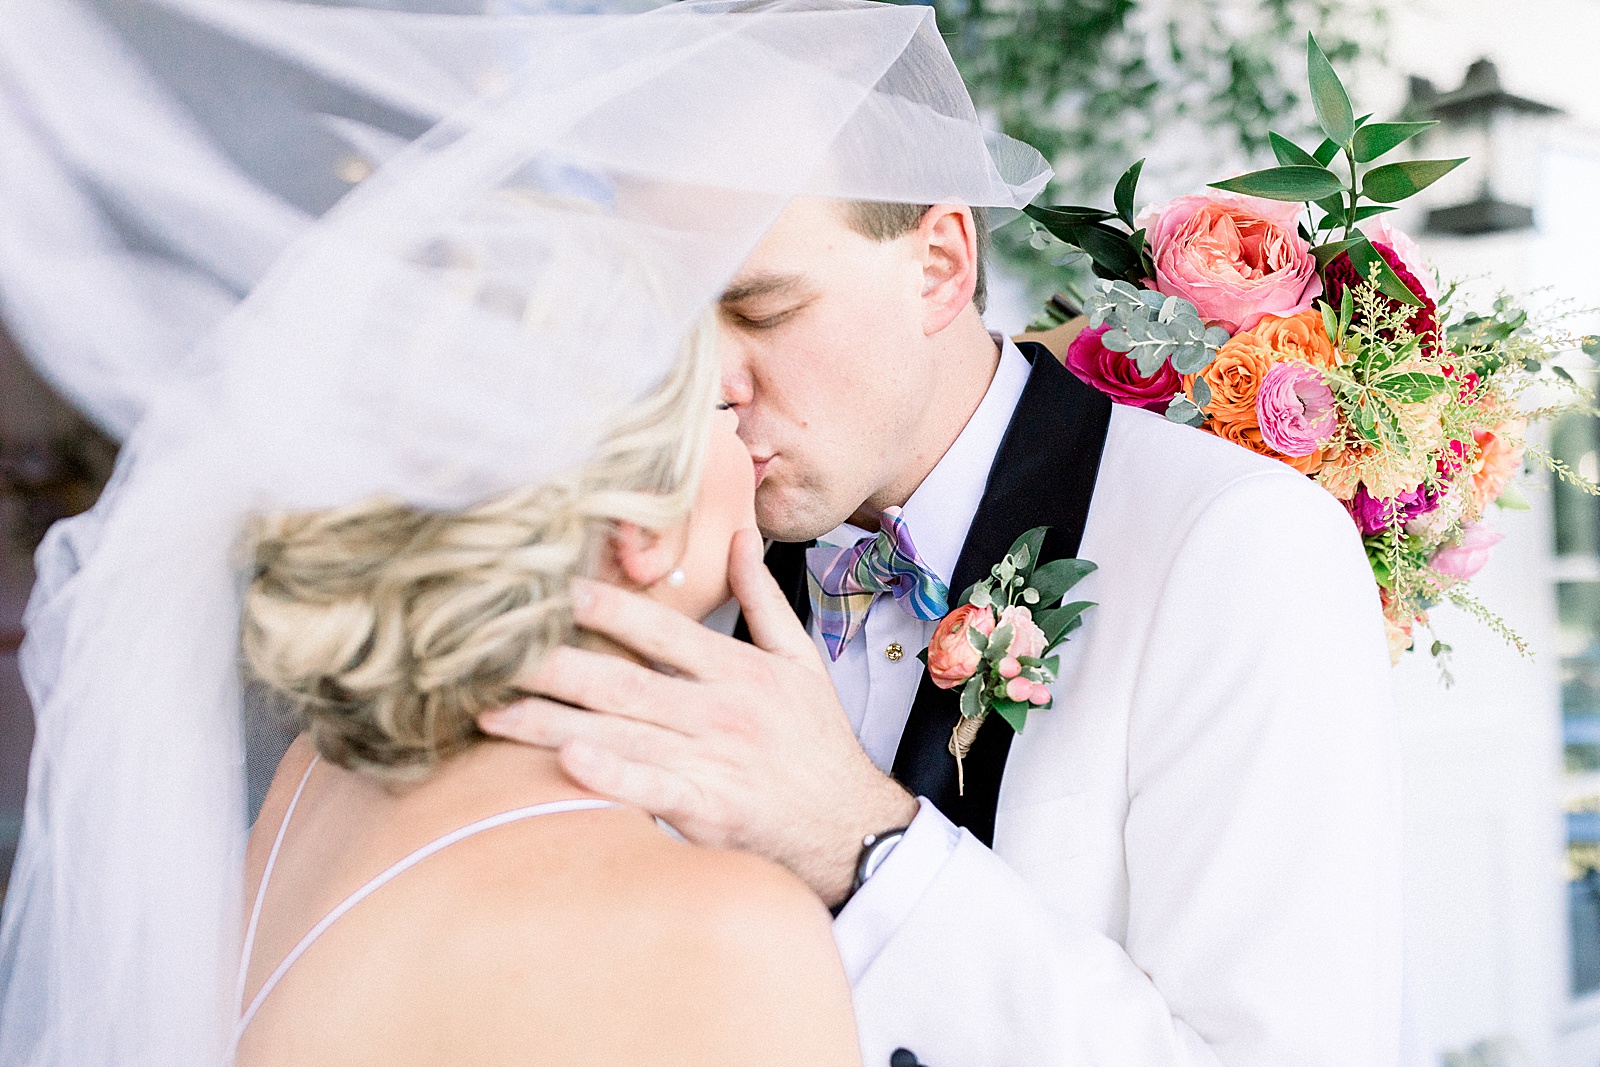 Veil-Kissing-Newlywed-Picture